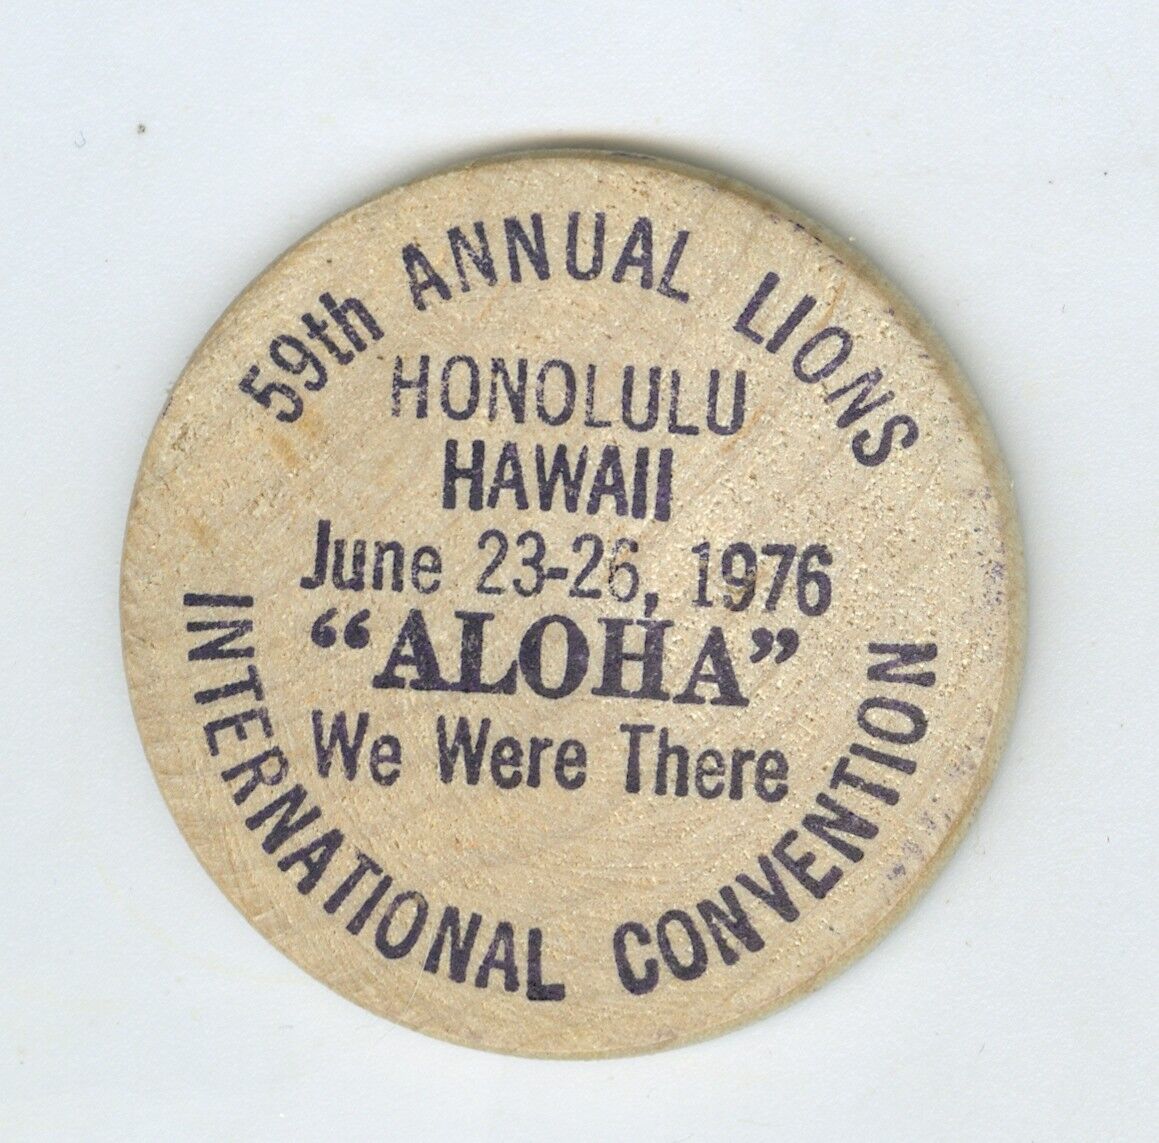 June 23-25, 1959, 59th Annual Lions, Honolulu, Hawaii Convention Wooden Nickel